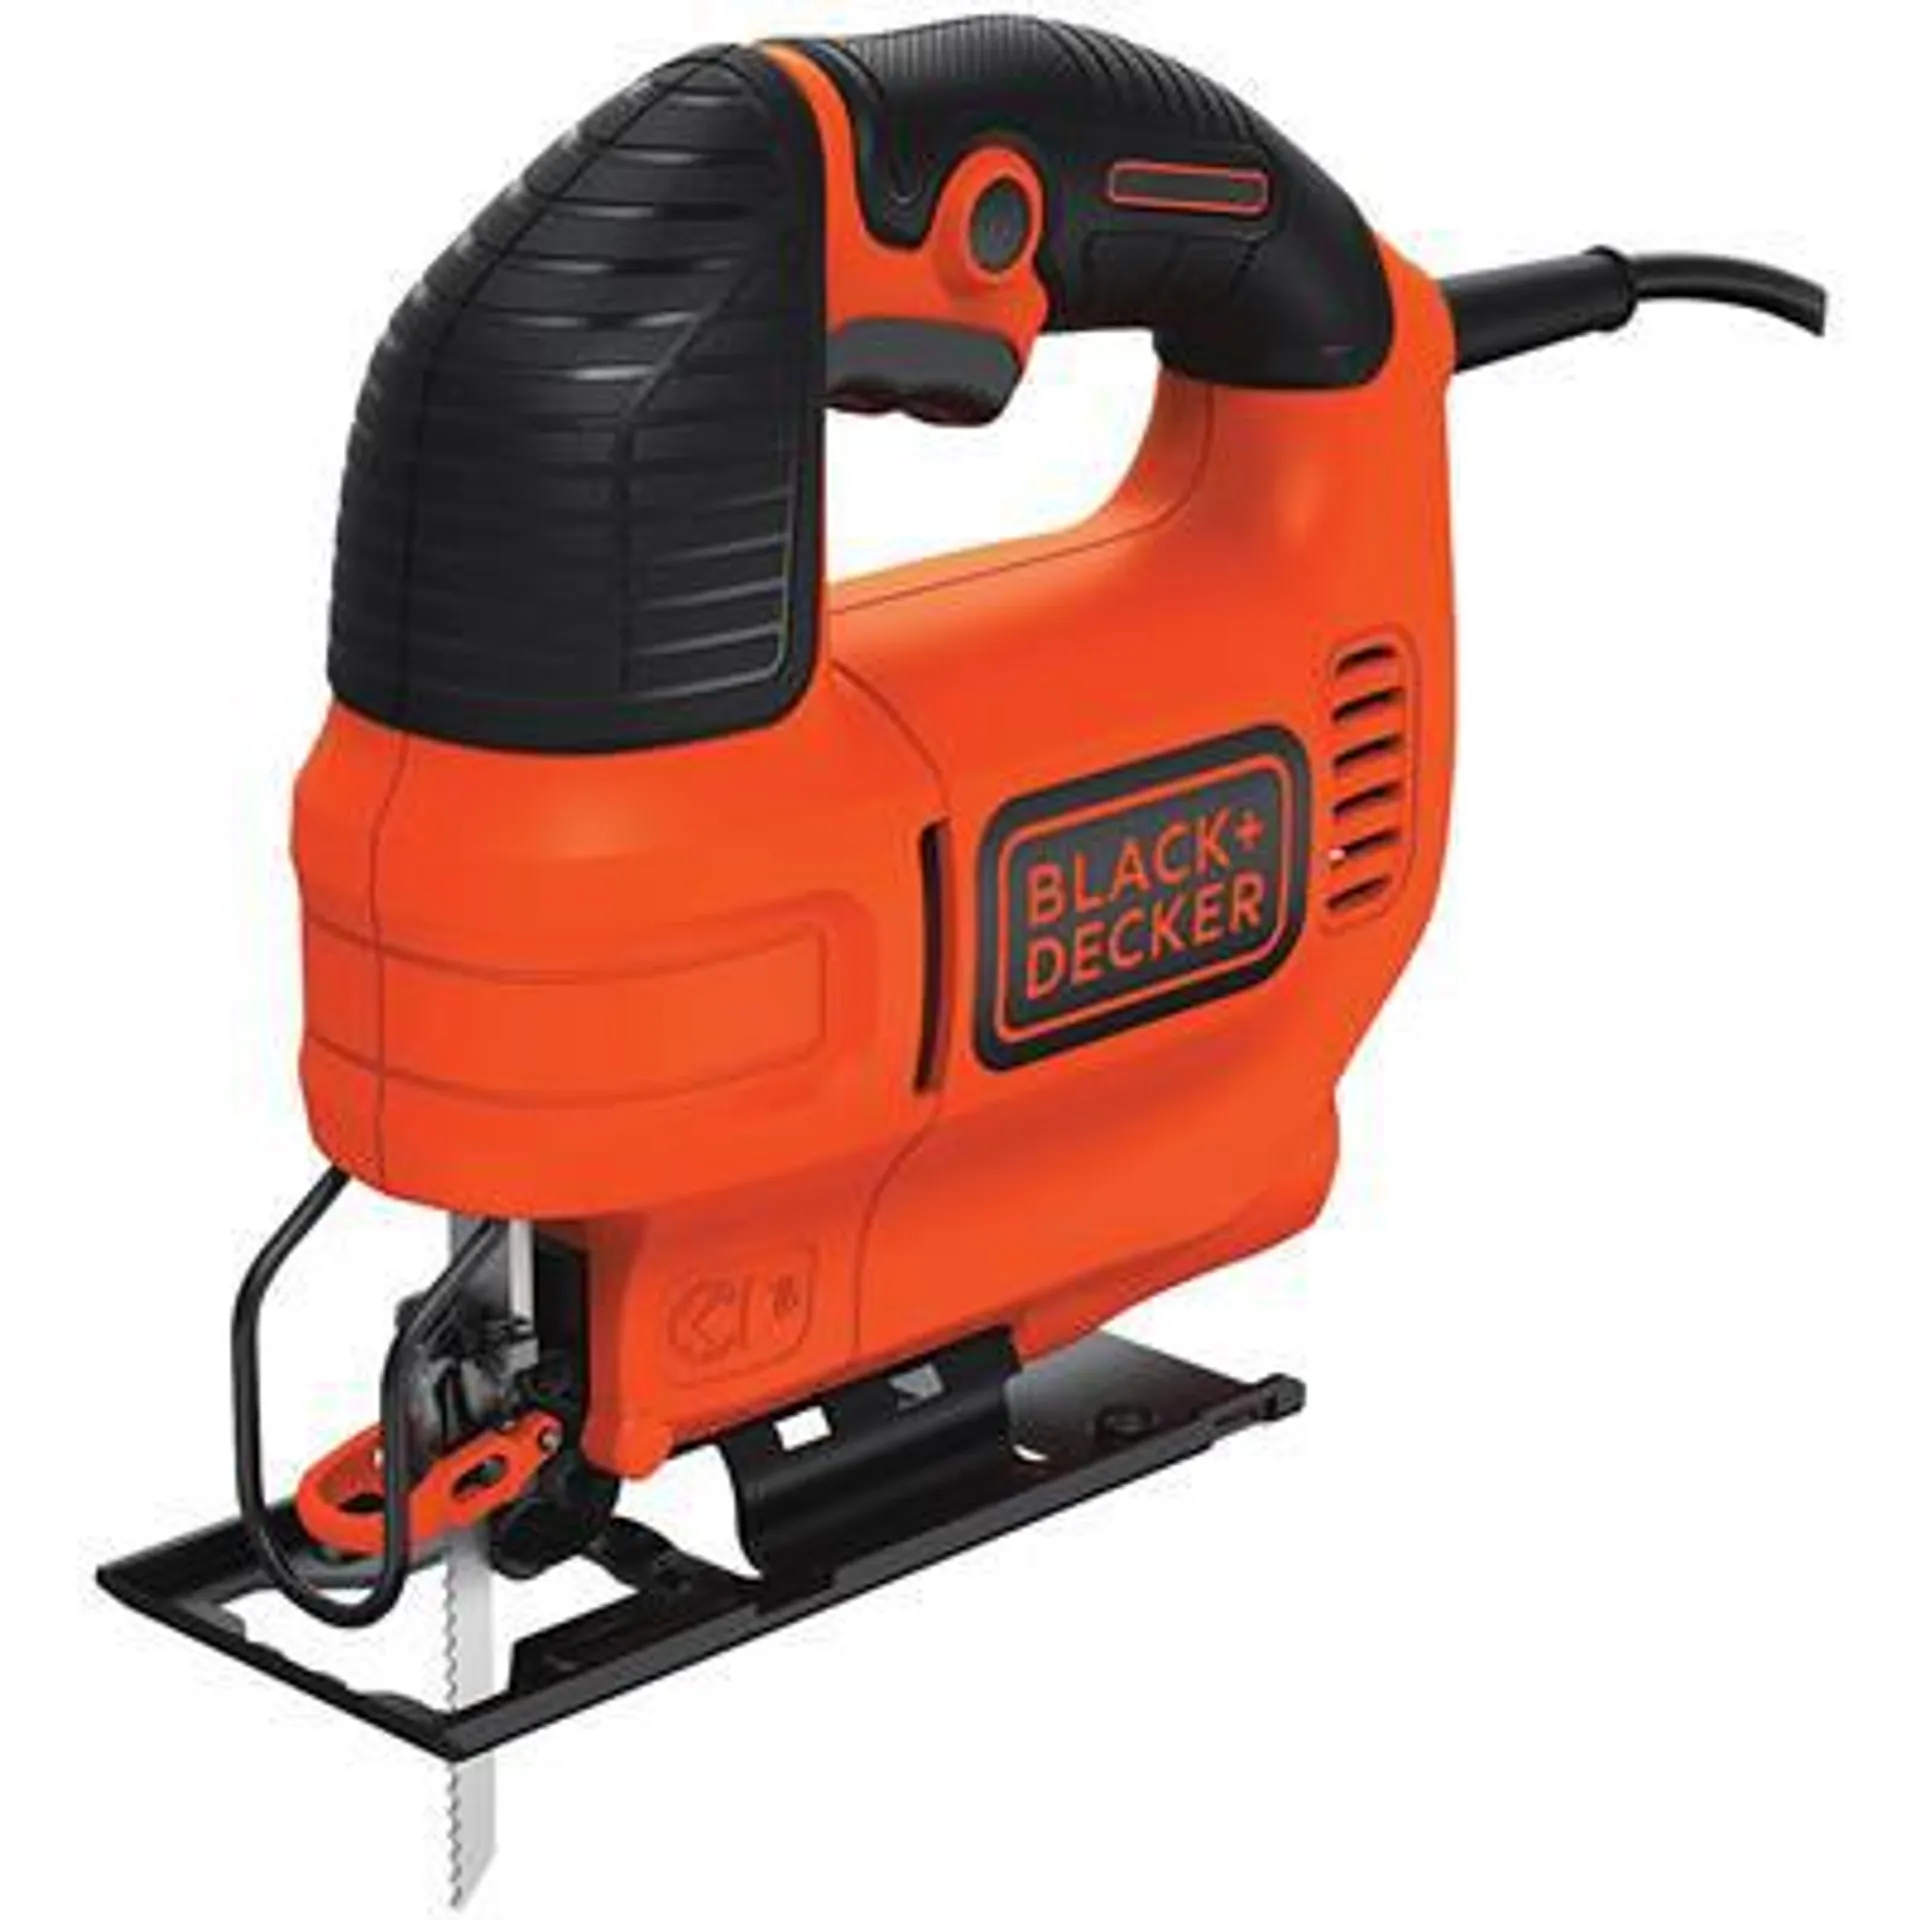 Black and Decker 520w Variable Speed Jigsaw